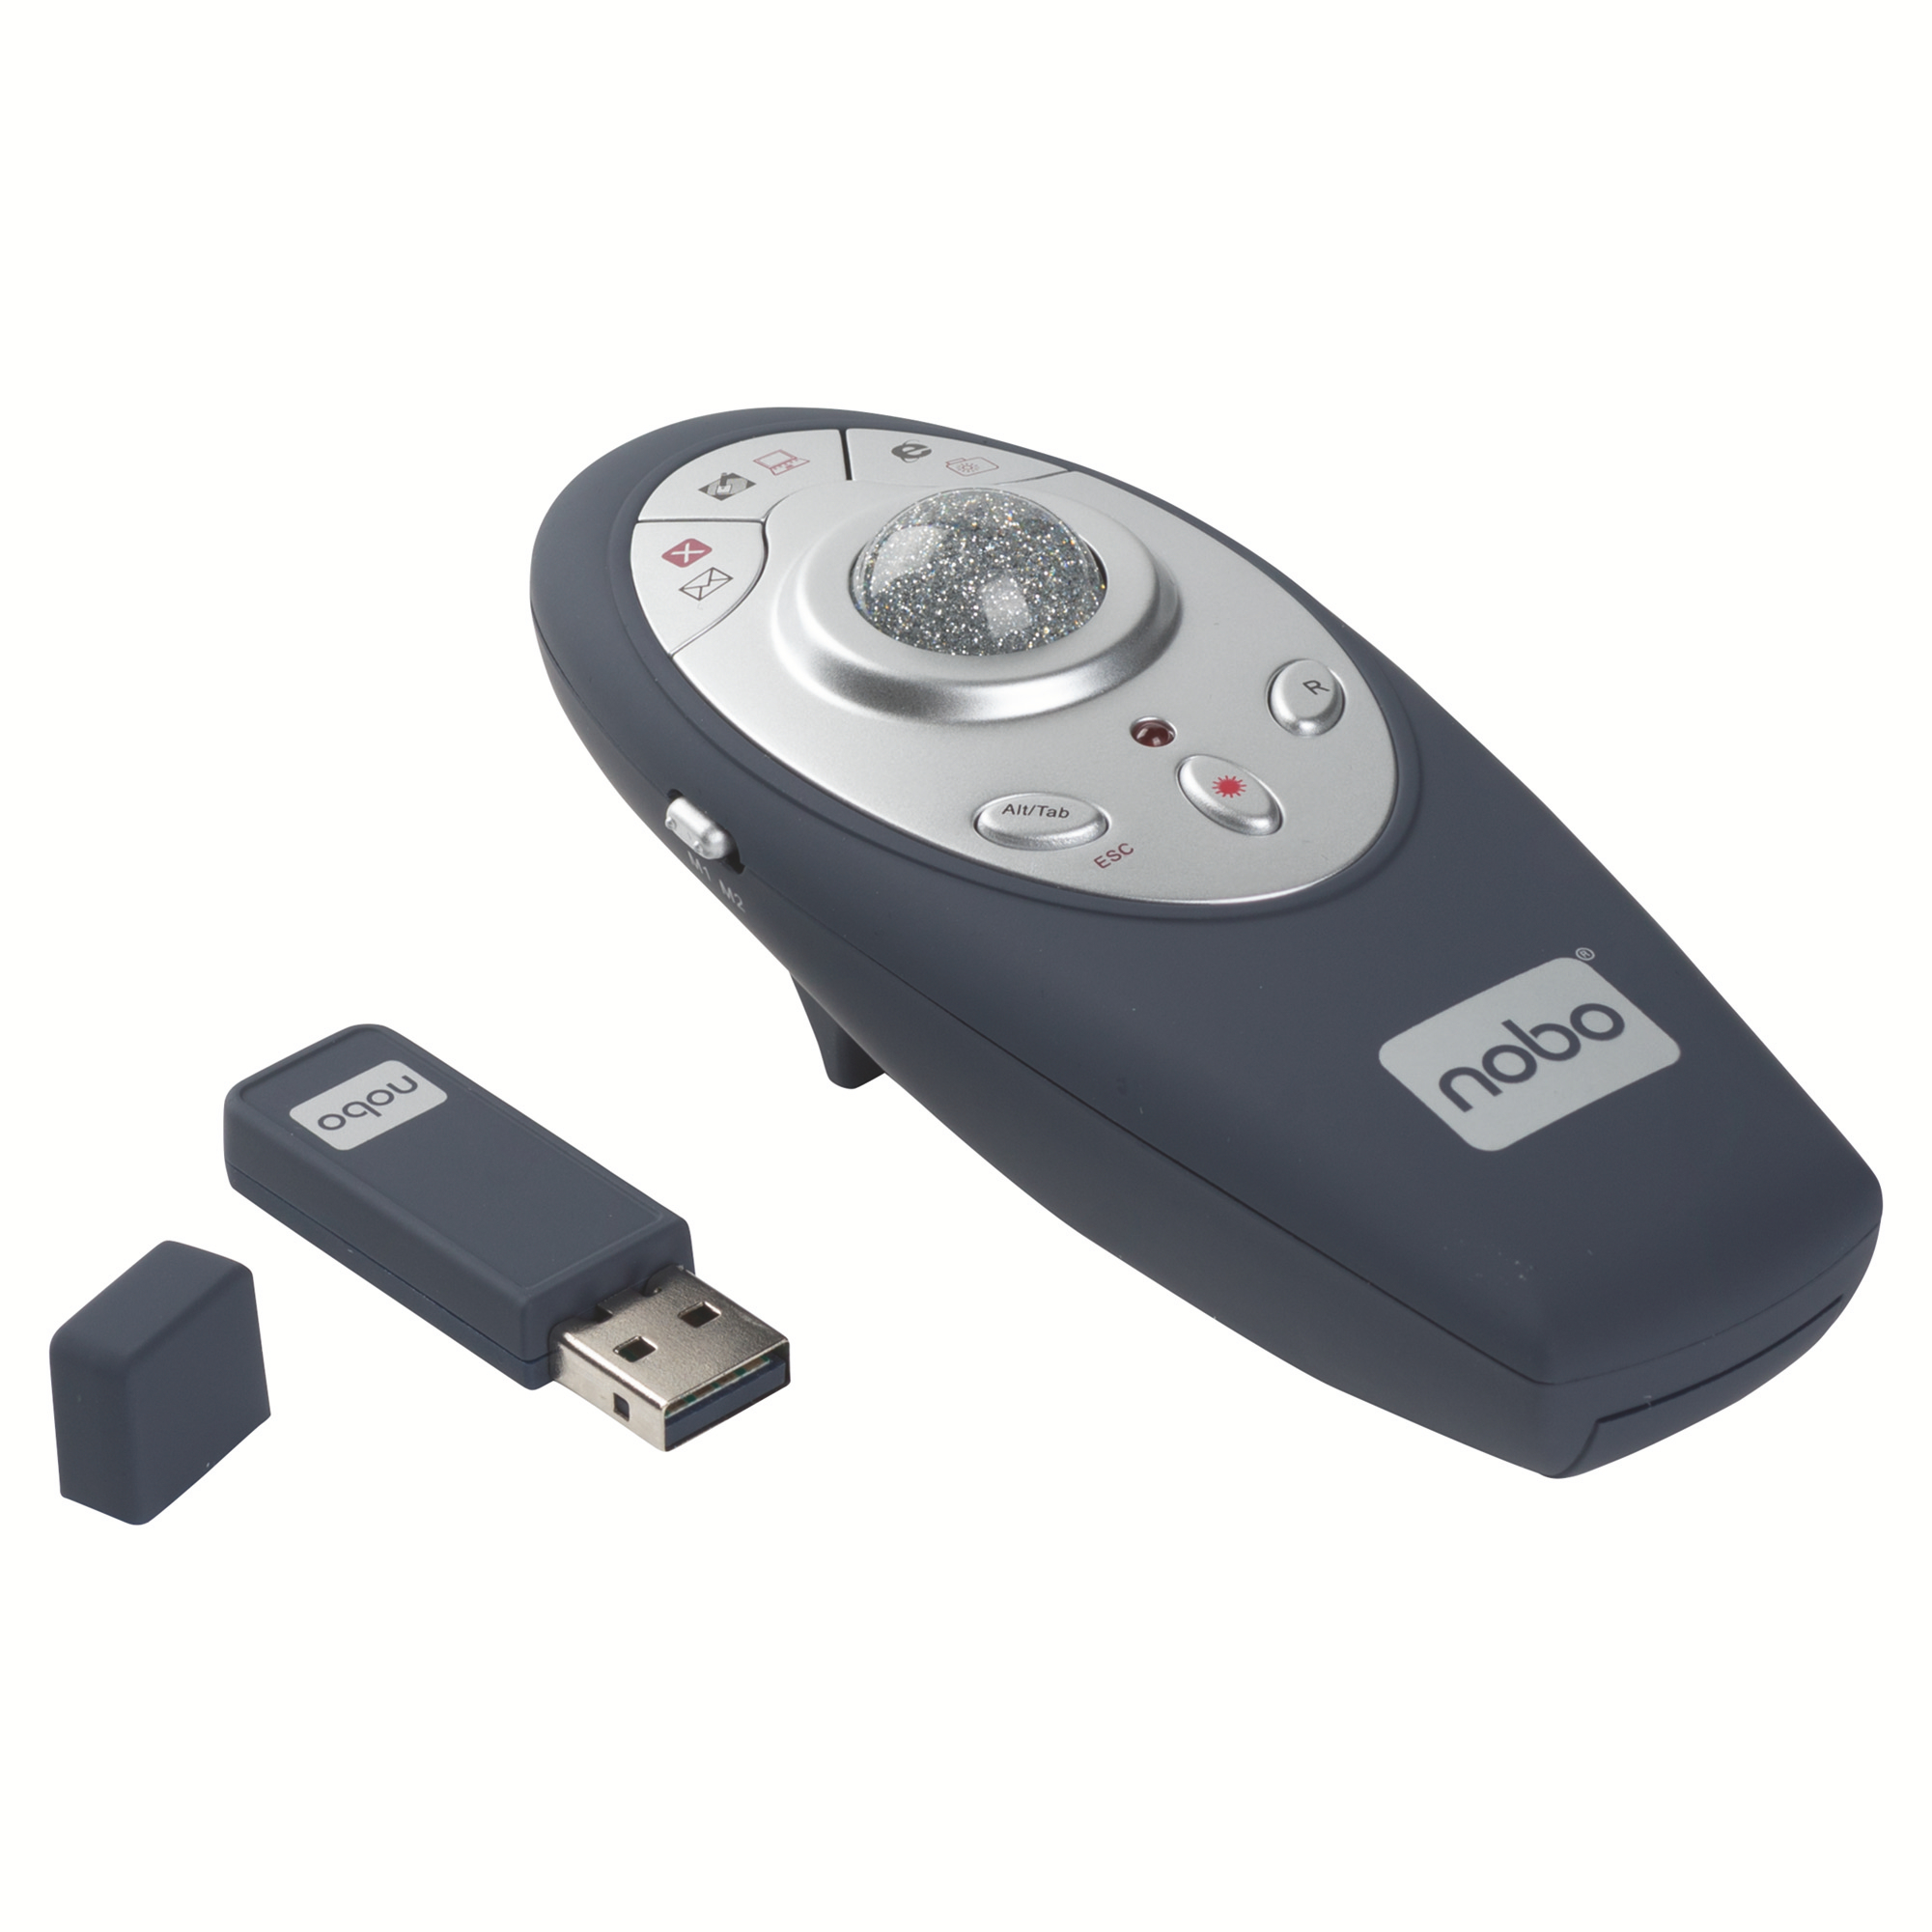 Accessories Nobo P3 Presenter Remote and Mouse with Red Laser 1902390